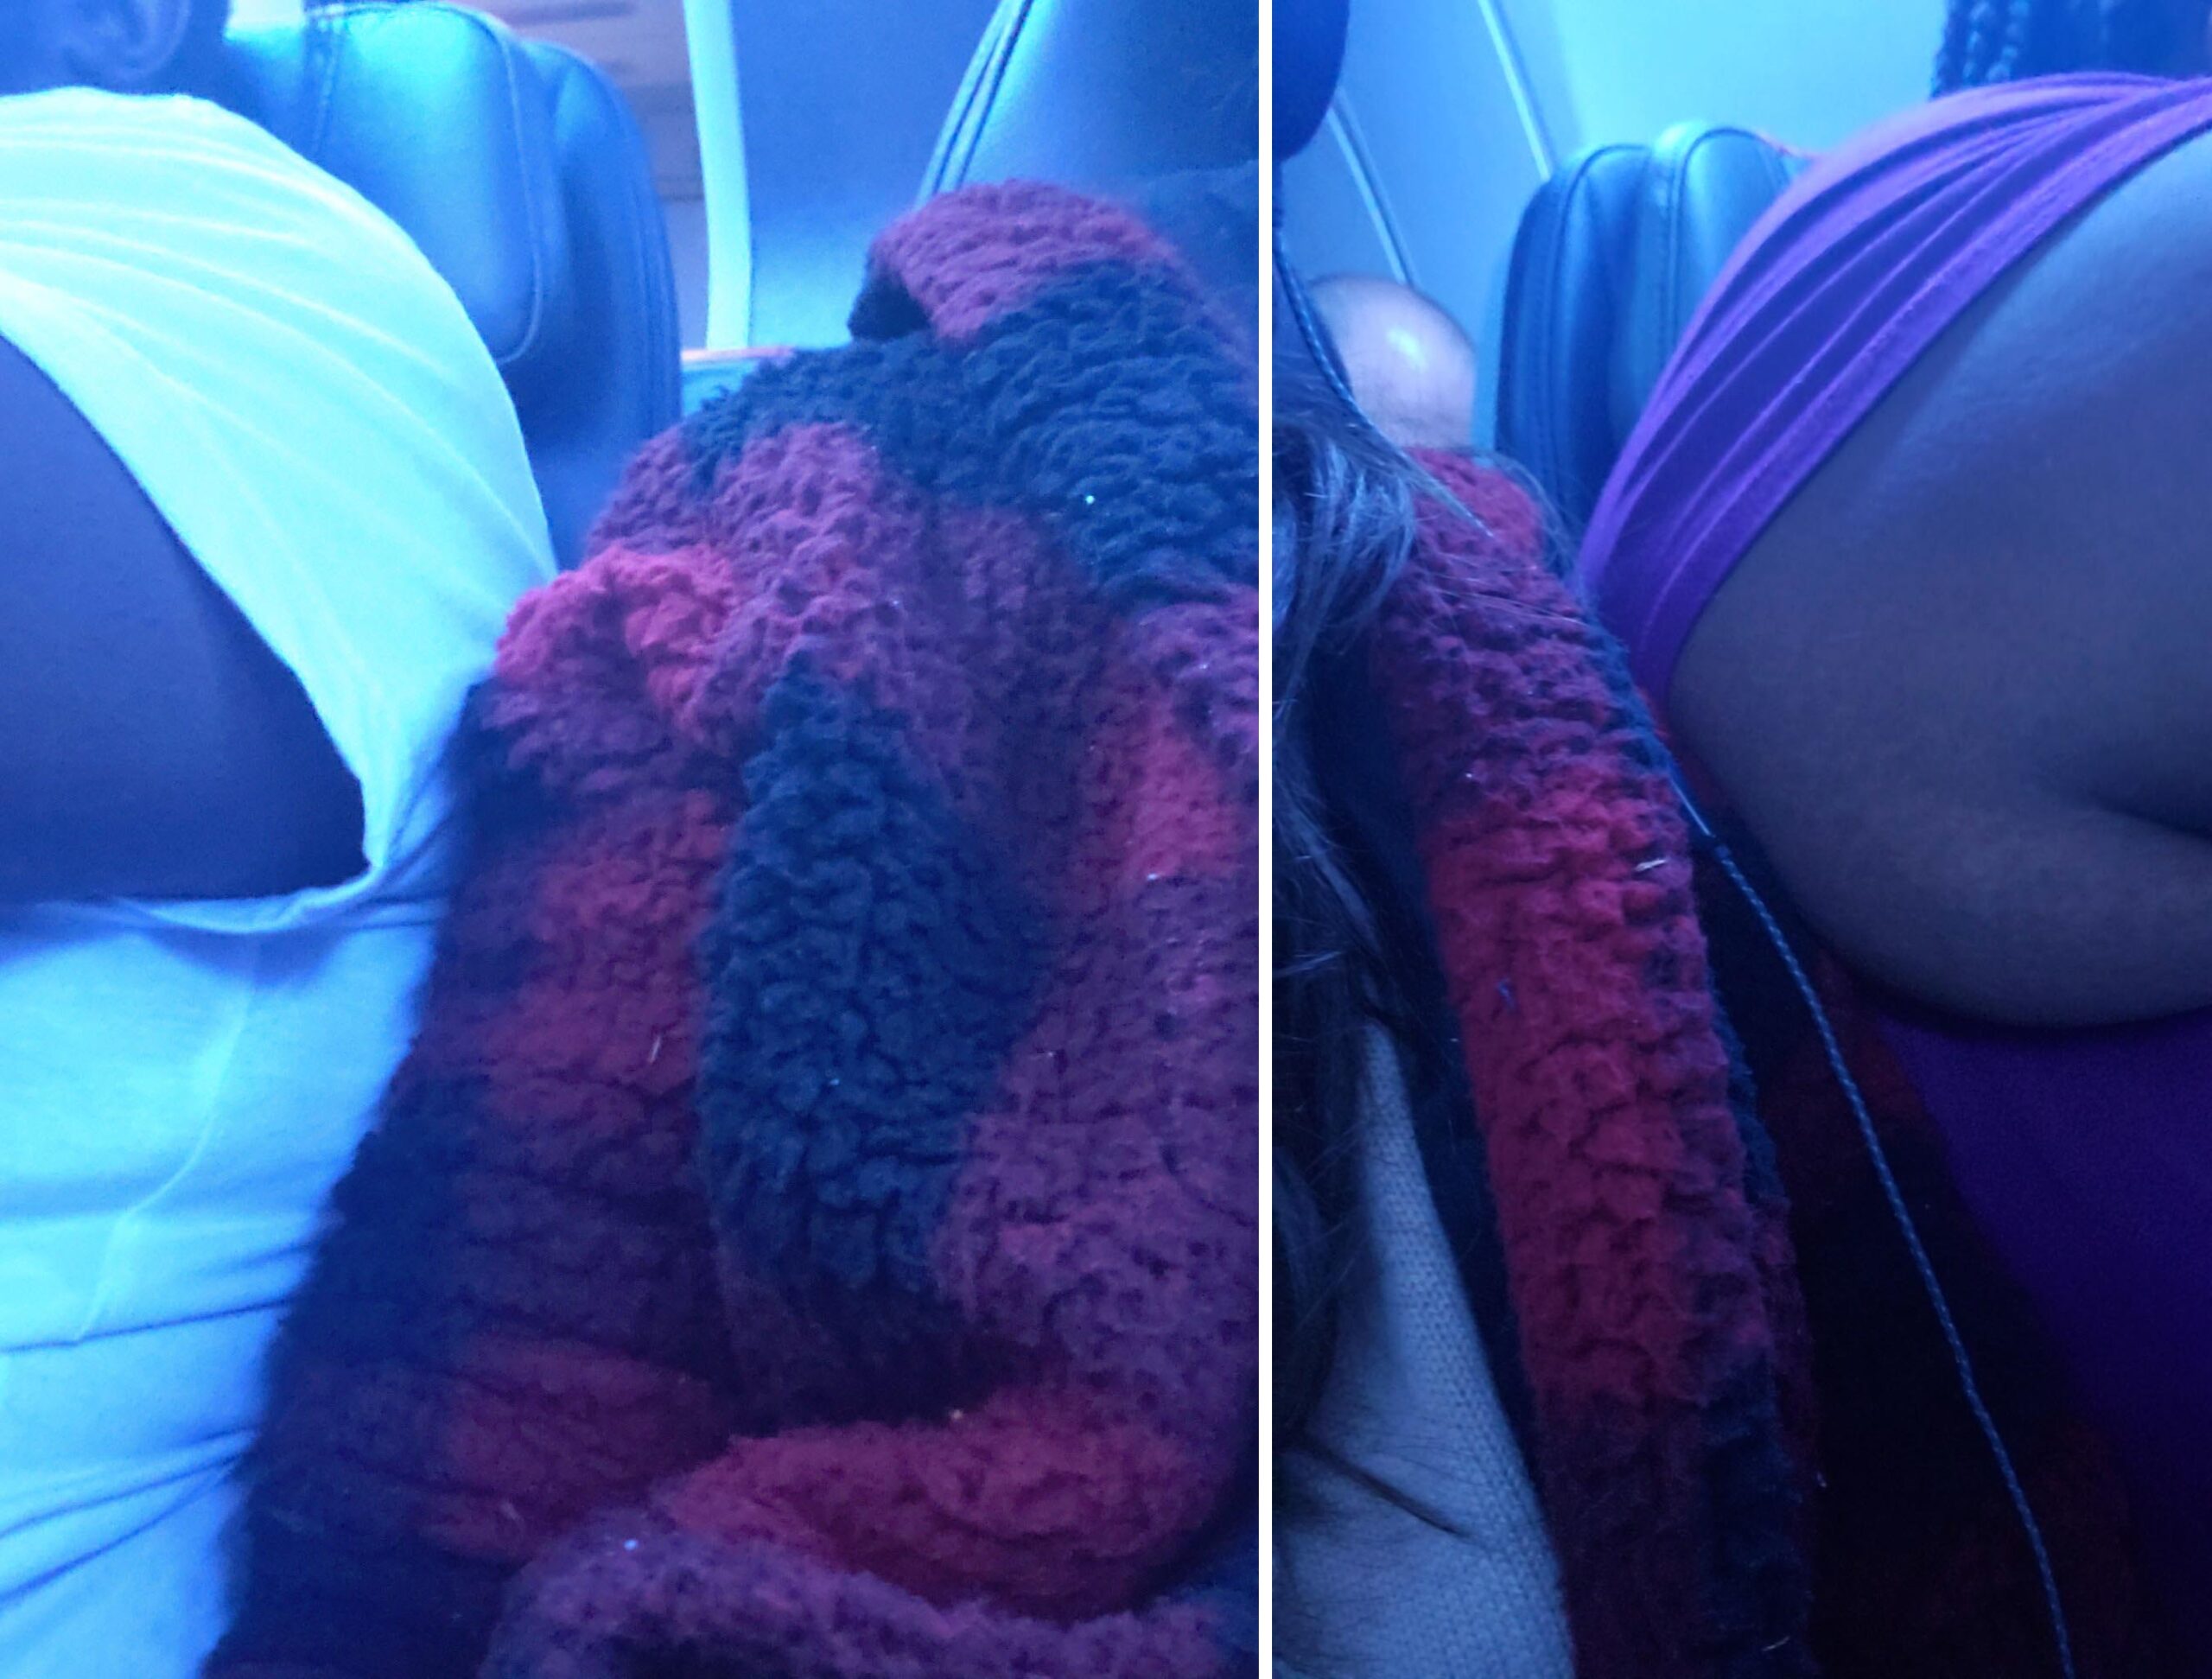 A passenger is asking American Airlines for reparations after complaining she was 'wedged between two obese people'